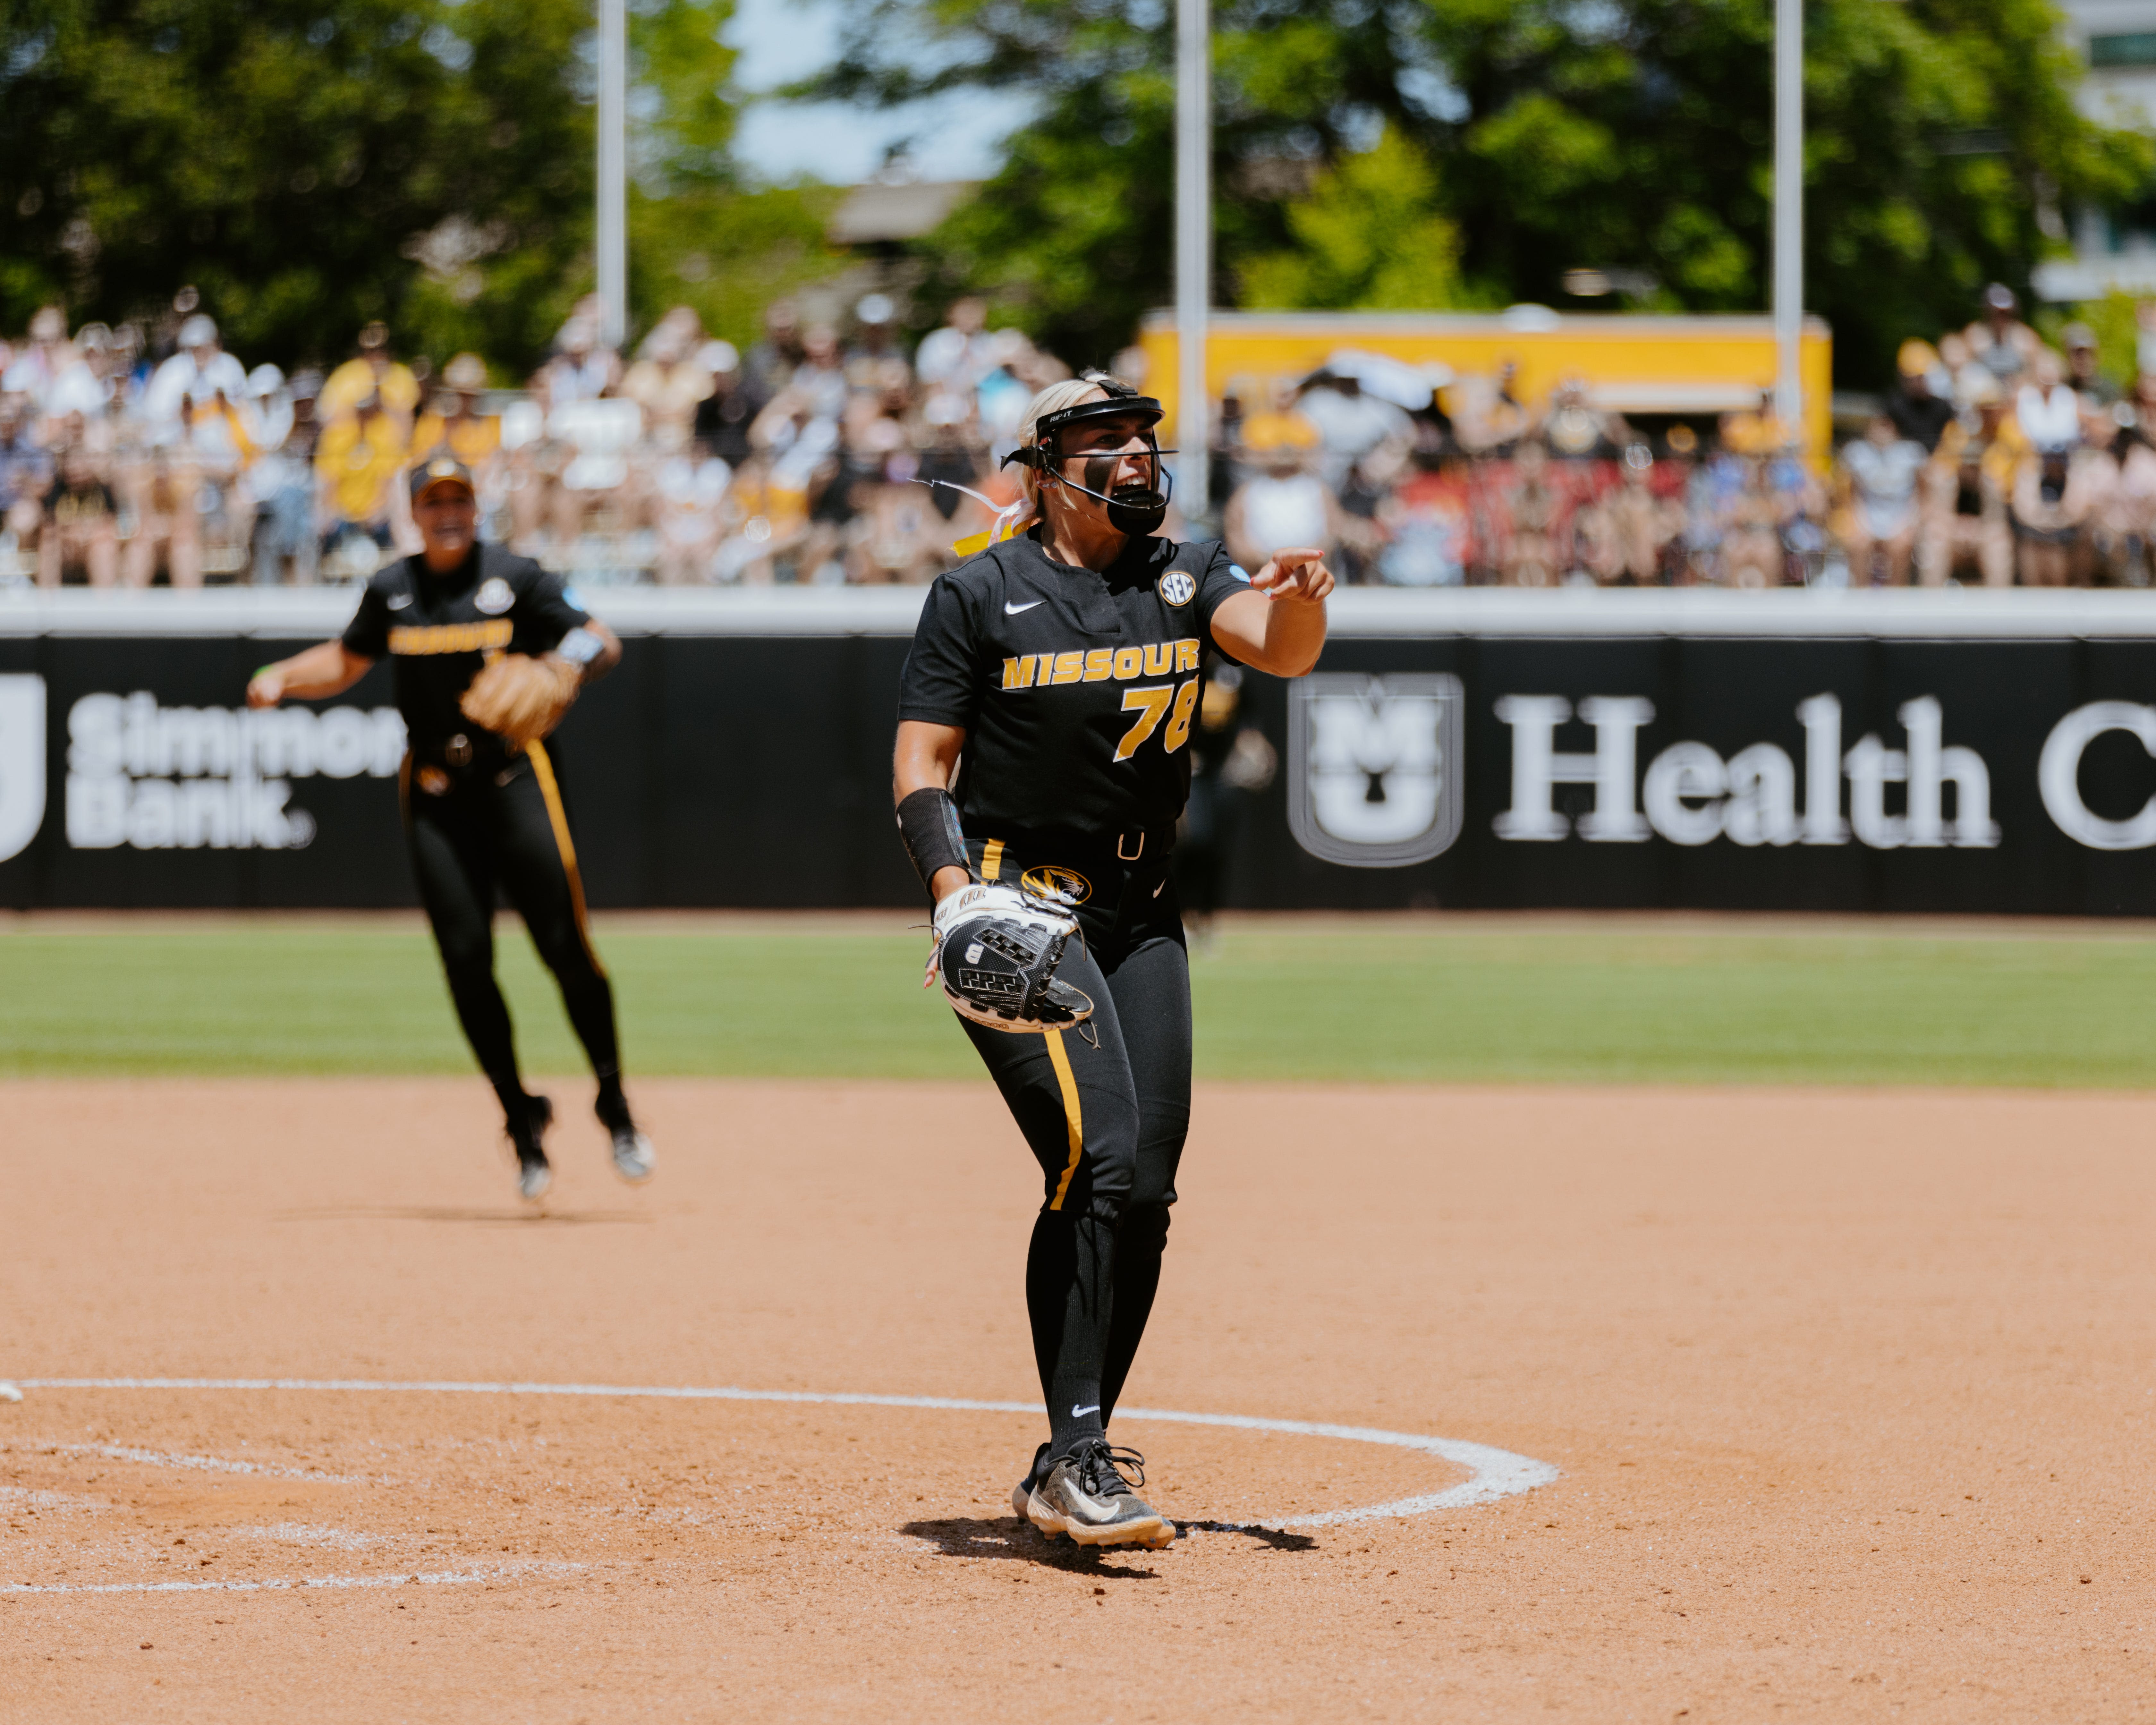 Survivors: How Missouri softball, with end in sight again, set up super regional rubber match